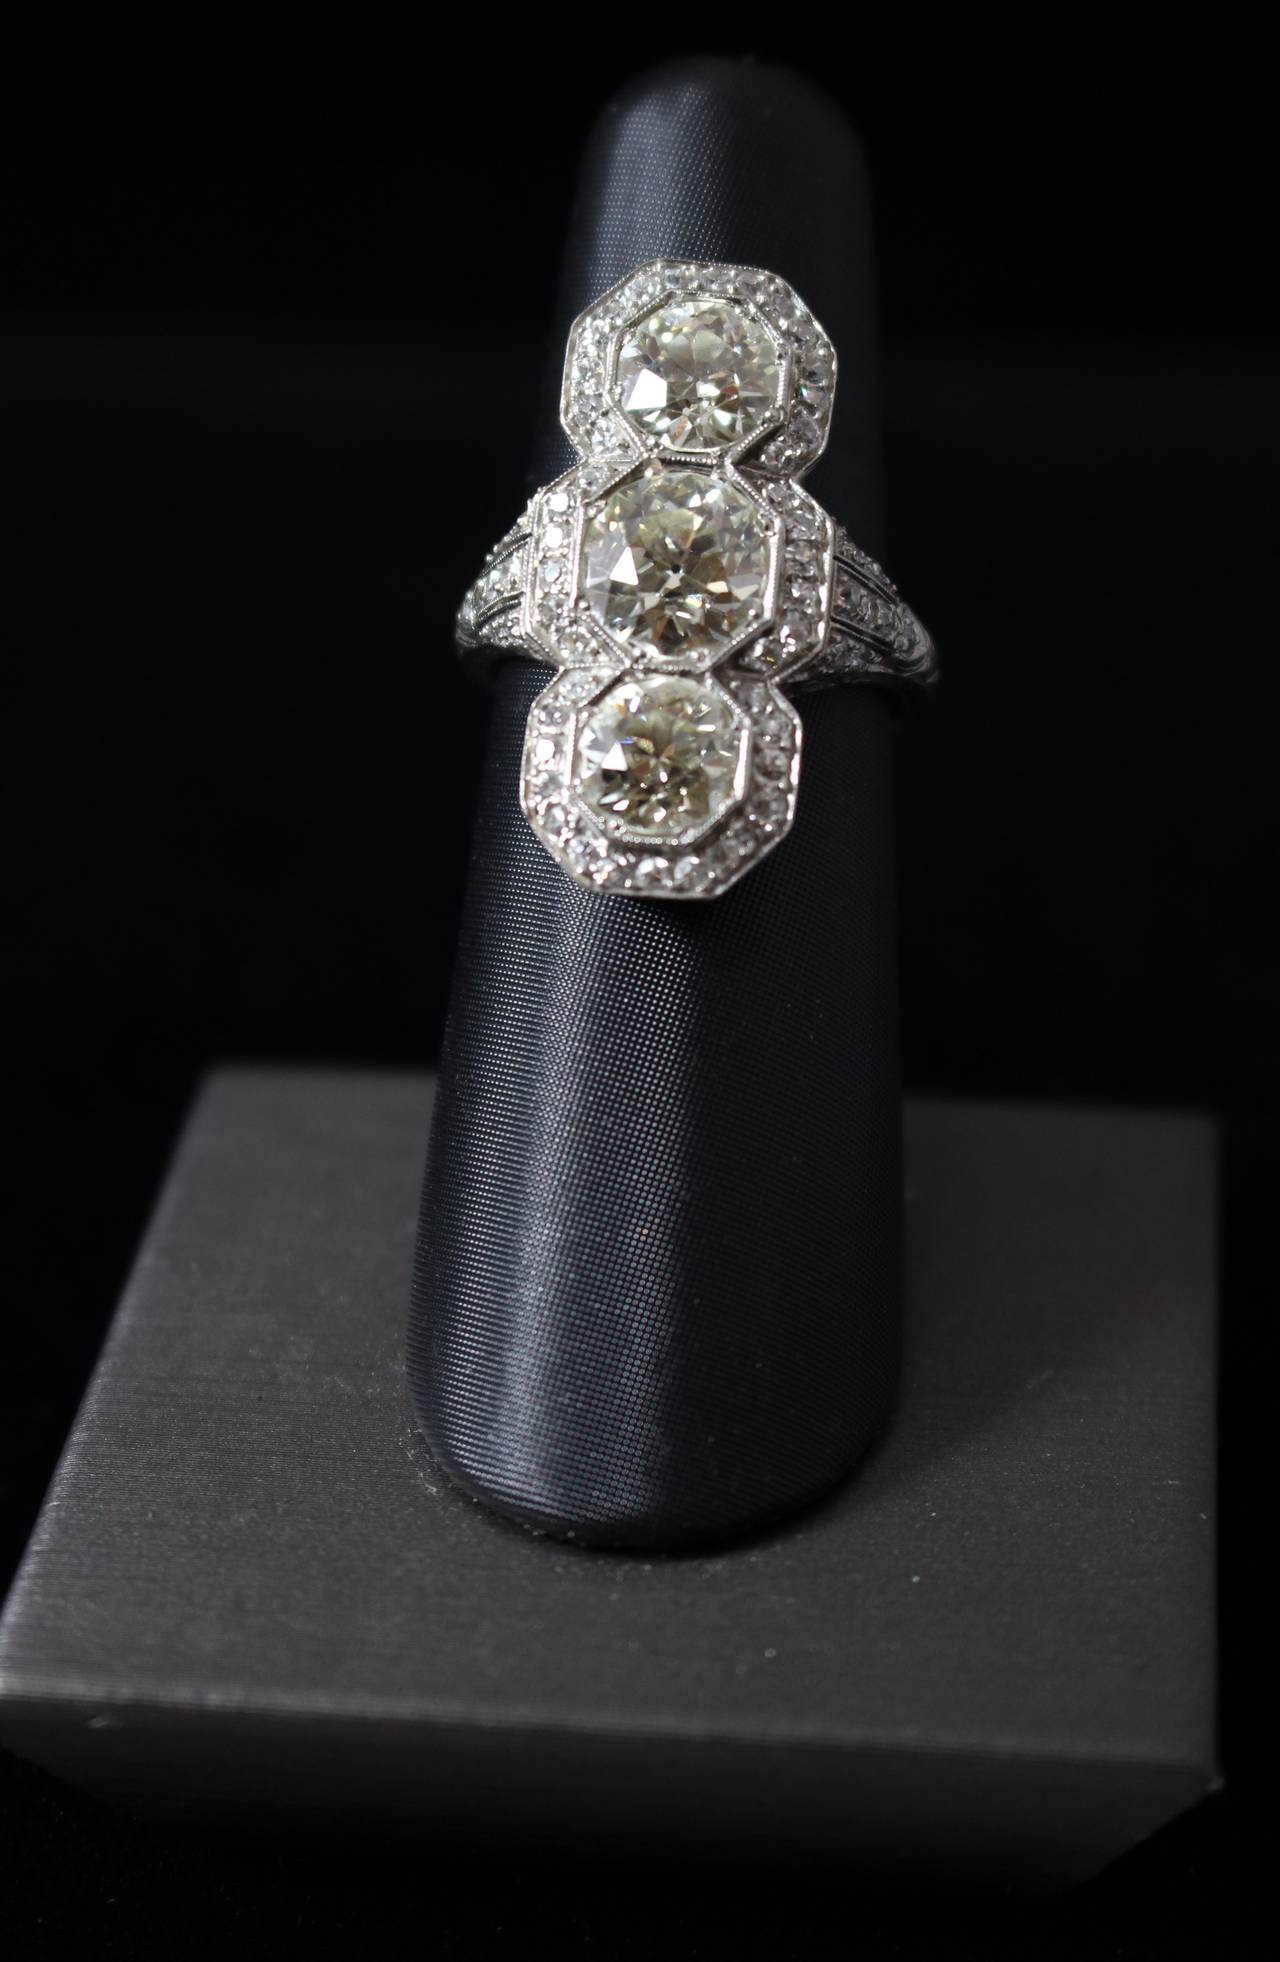 1900s Edwardian European Cut Diamonds Ring  In Excellent Condition For Sale In Los Angeles, CA